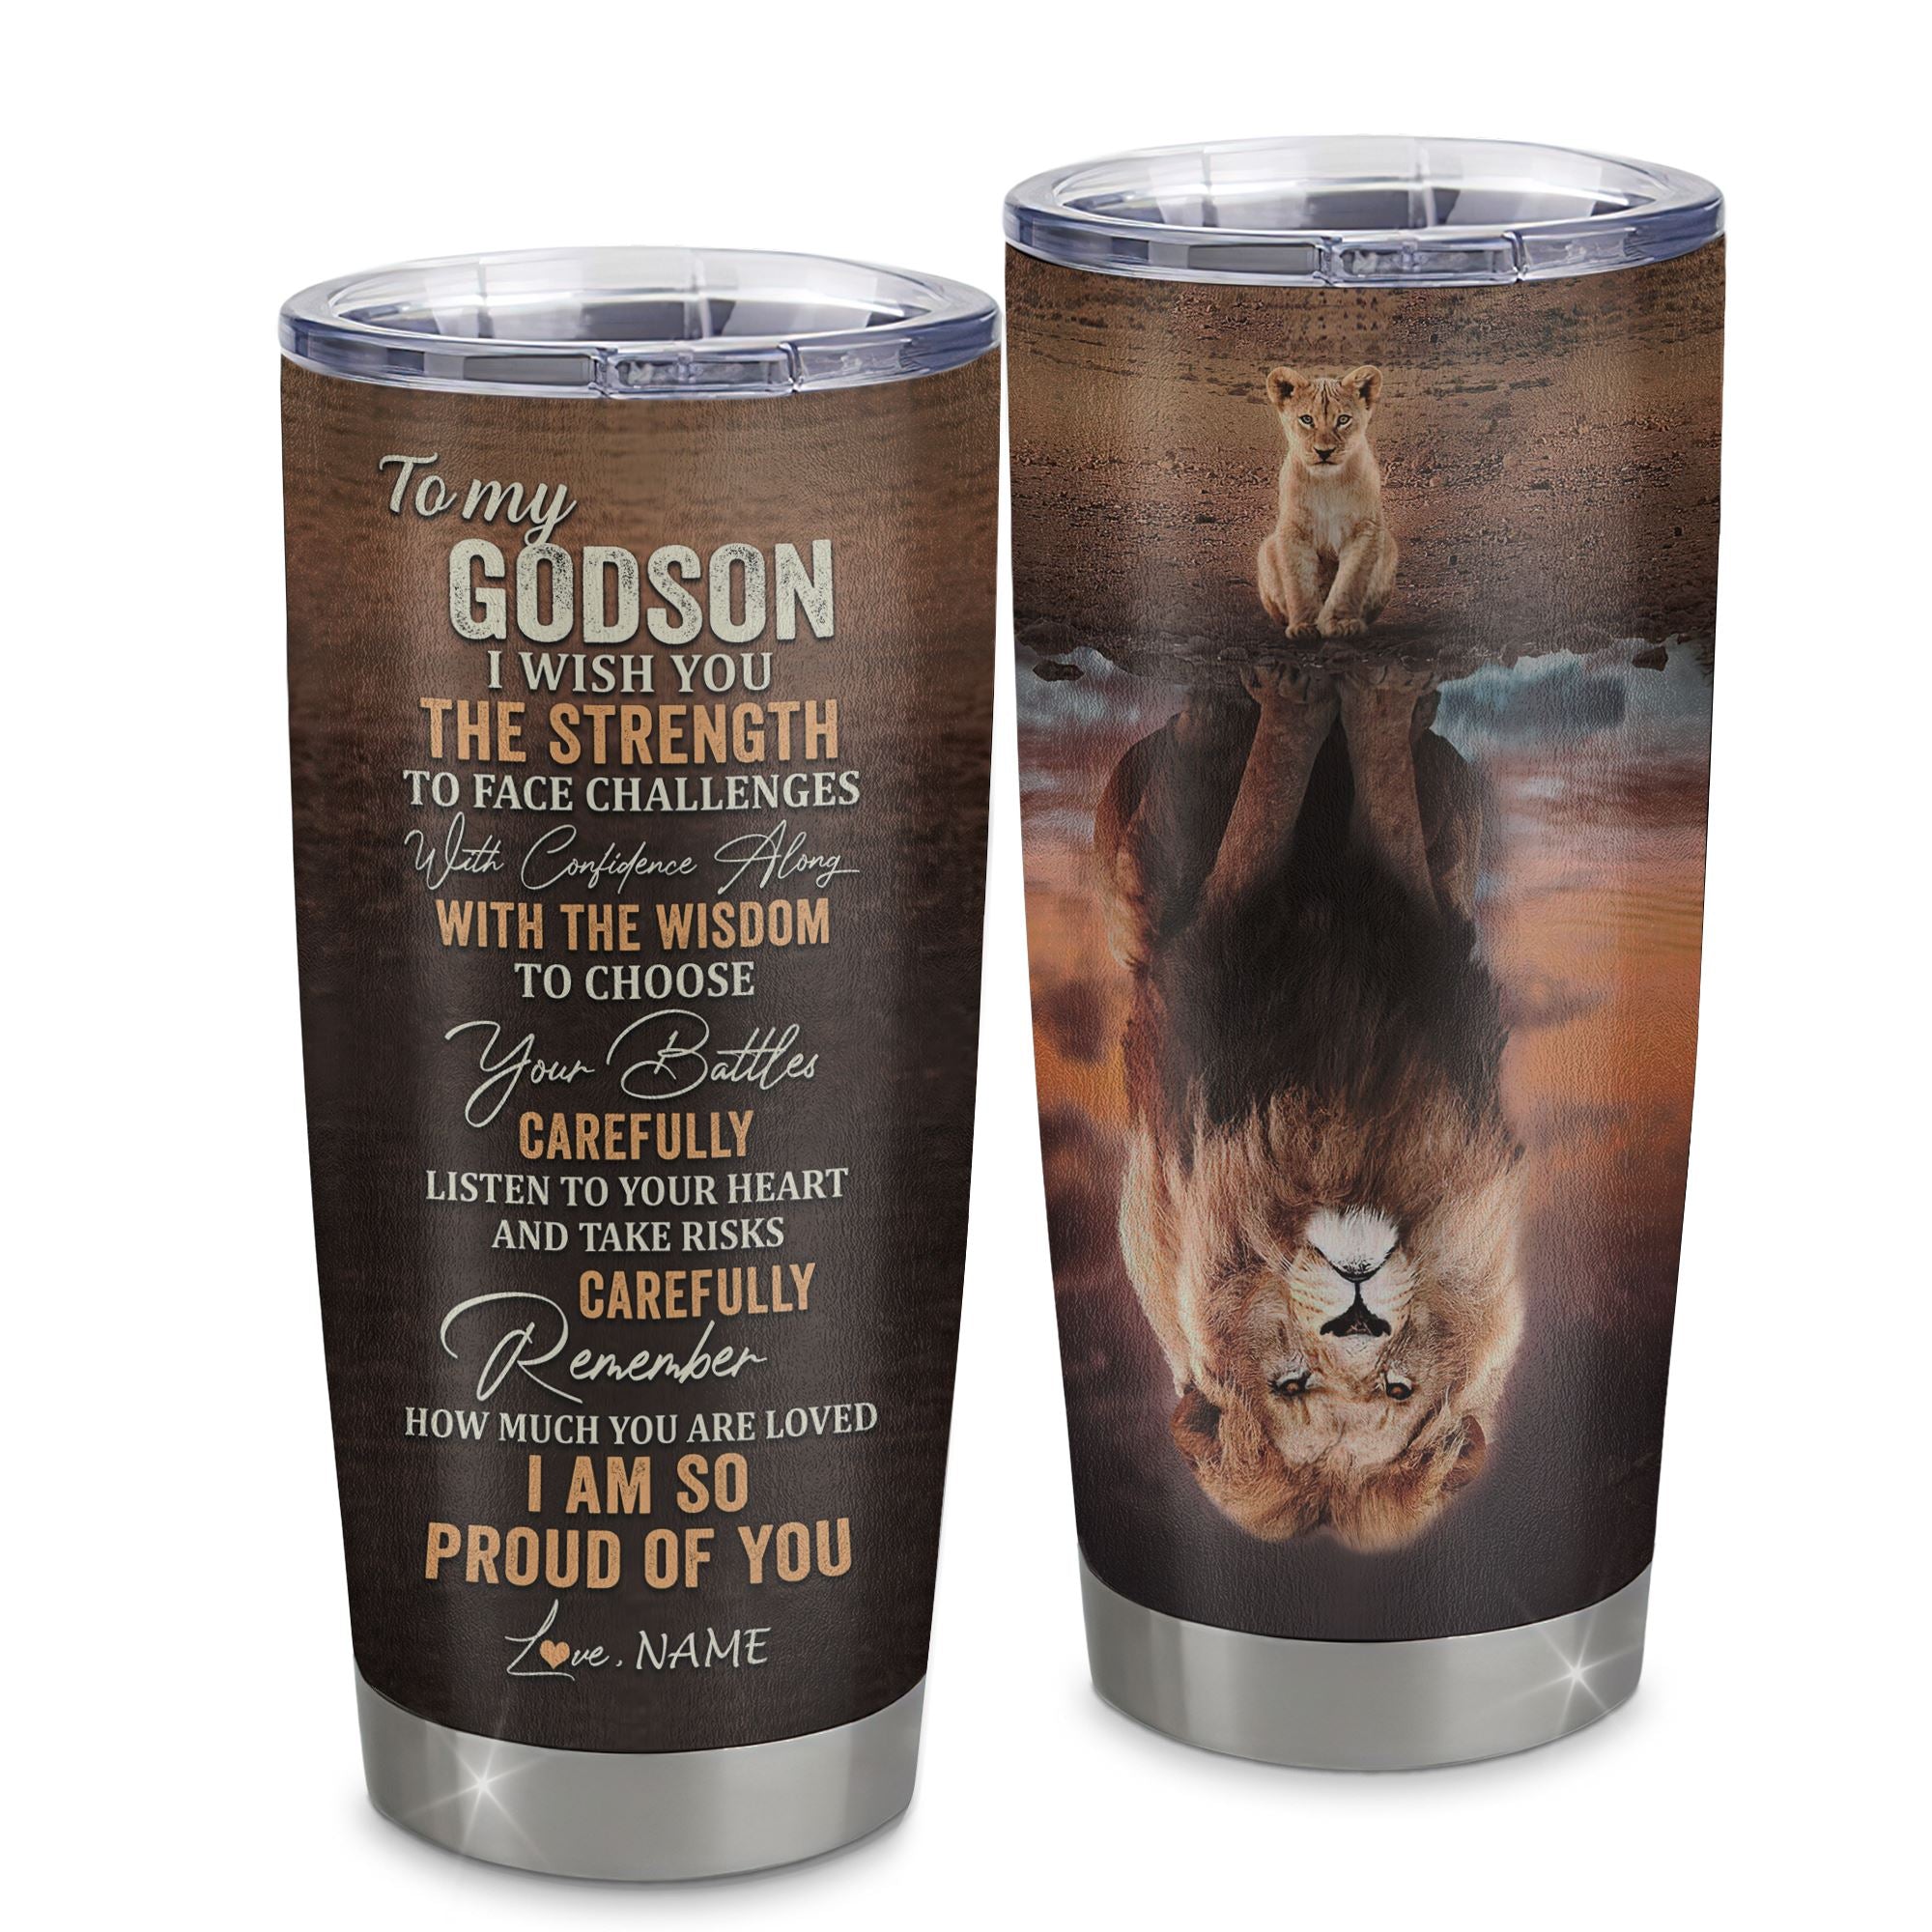 Lion, To My Godson From Godmother, Godfather, I Wish You The Strength - Personalized Tumbler Cup